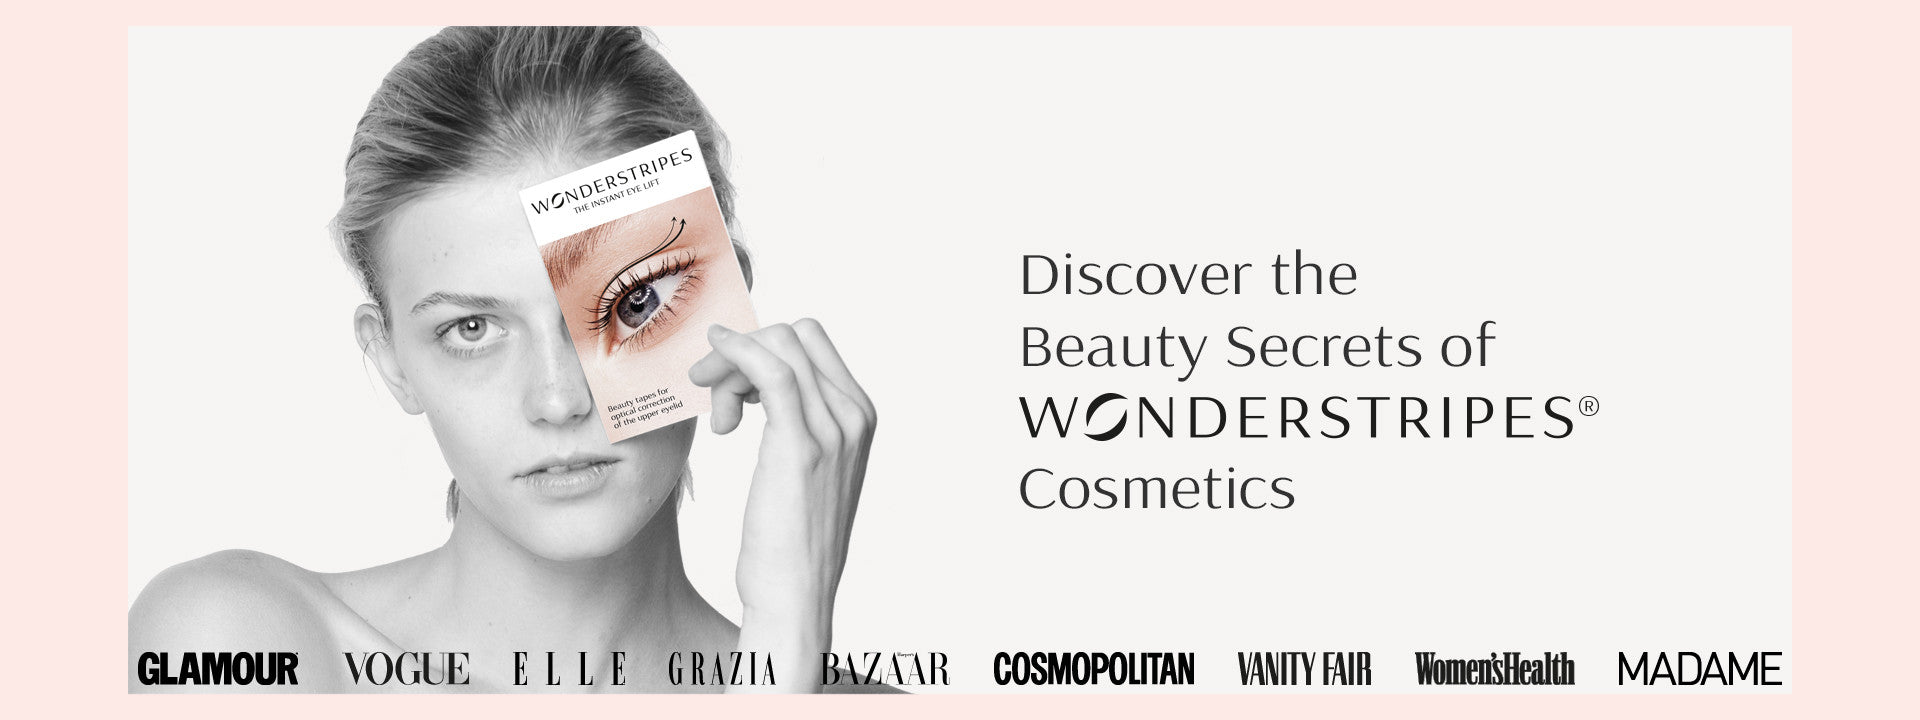 Discover the Beauty Secrets by WONDERSTRIPES Cosmetics